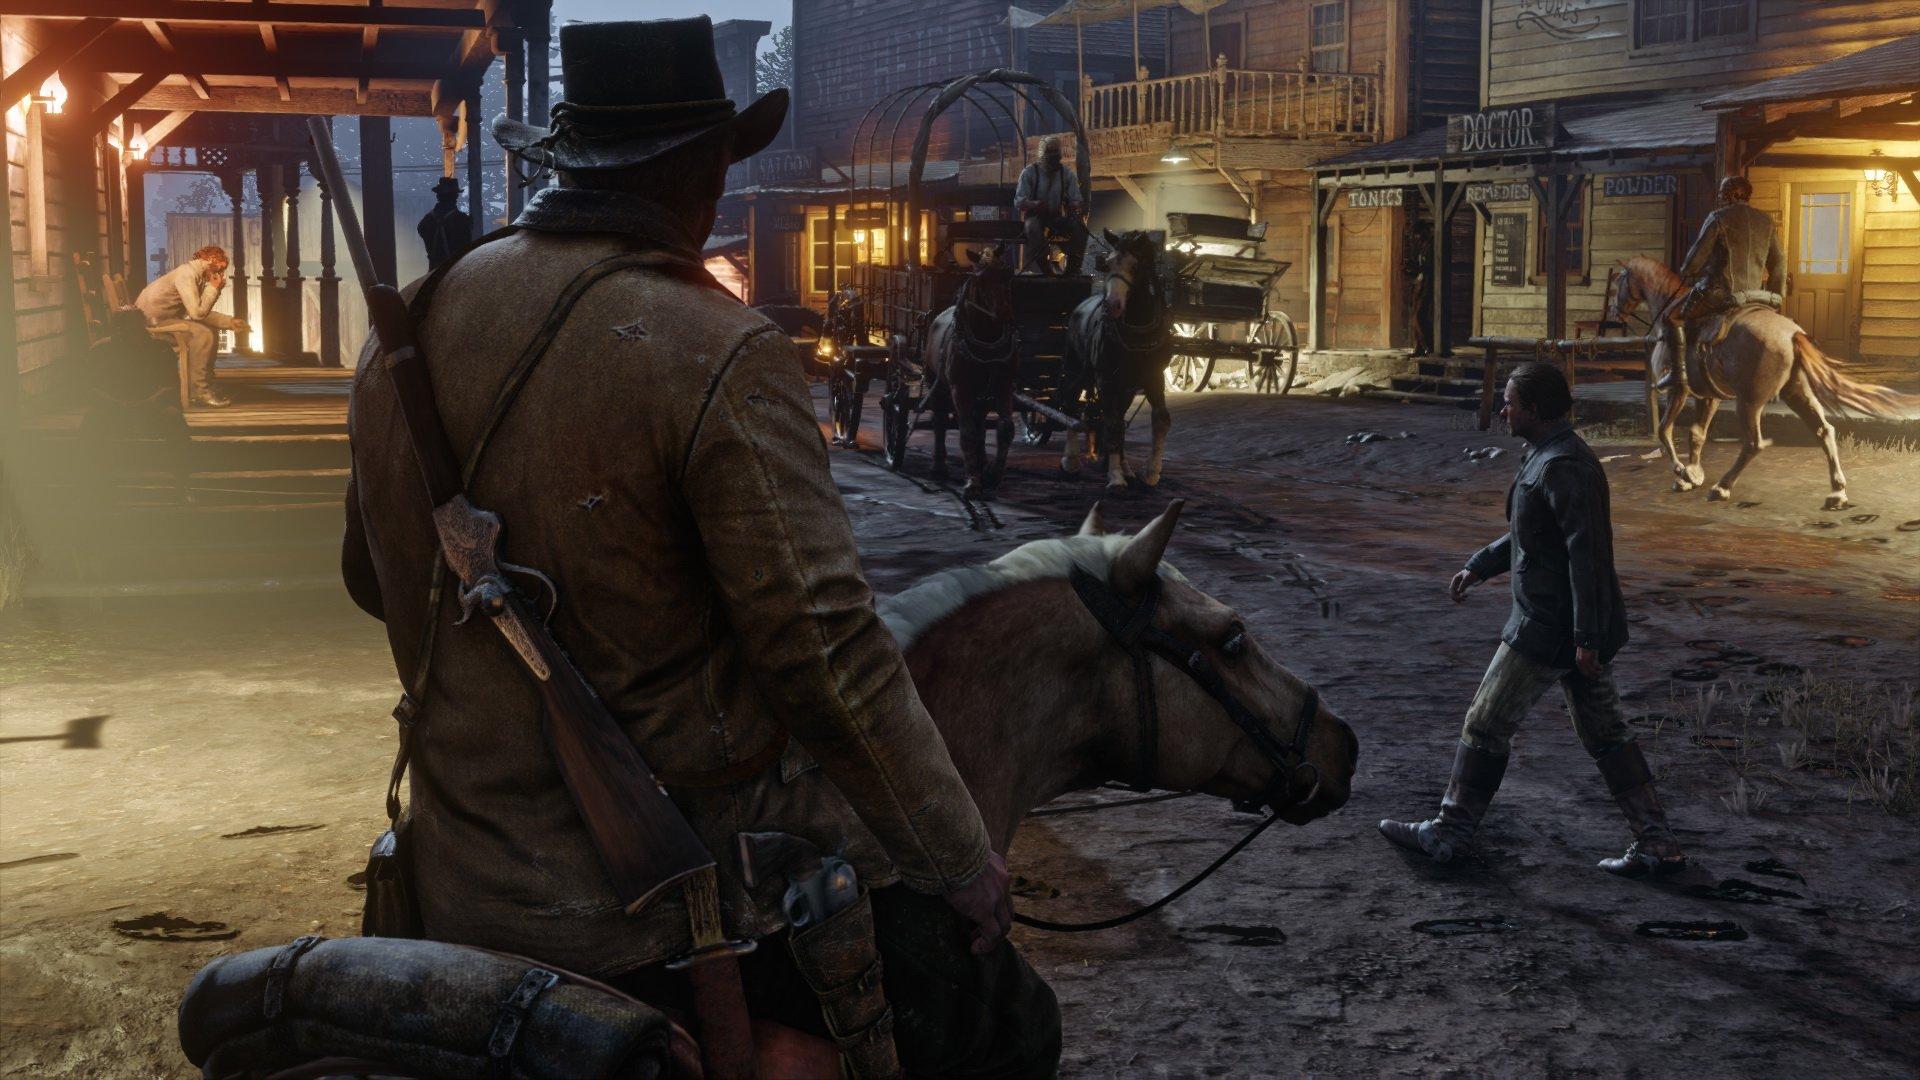 How much does it cost to build a gaming PC for Red Dead Redemption 2